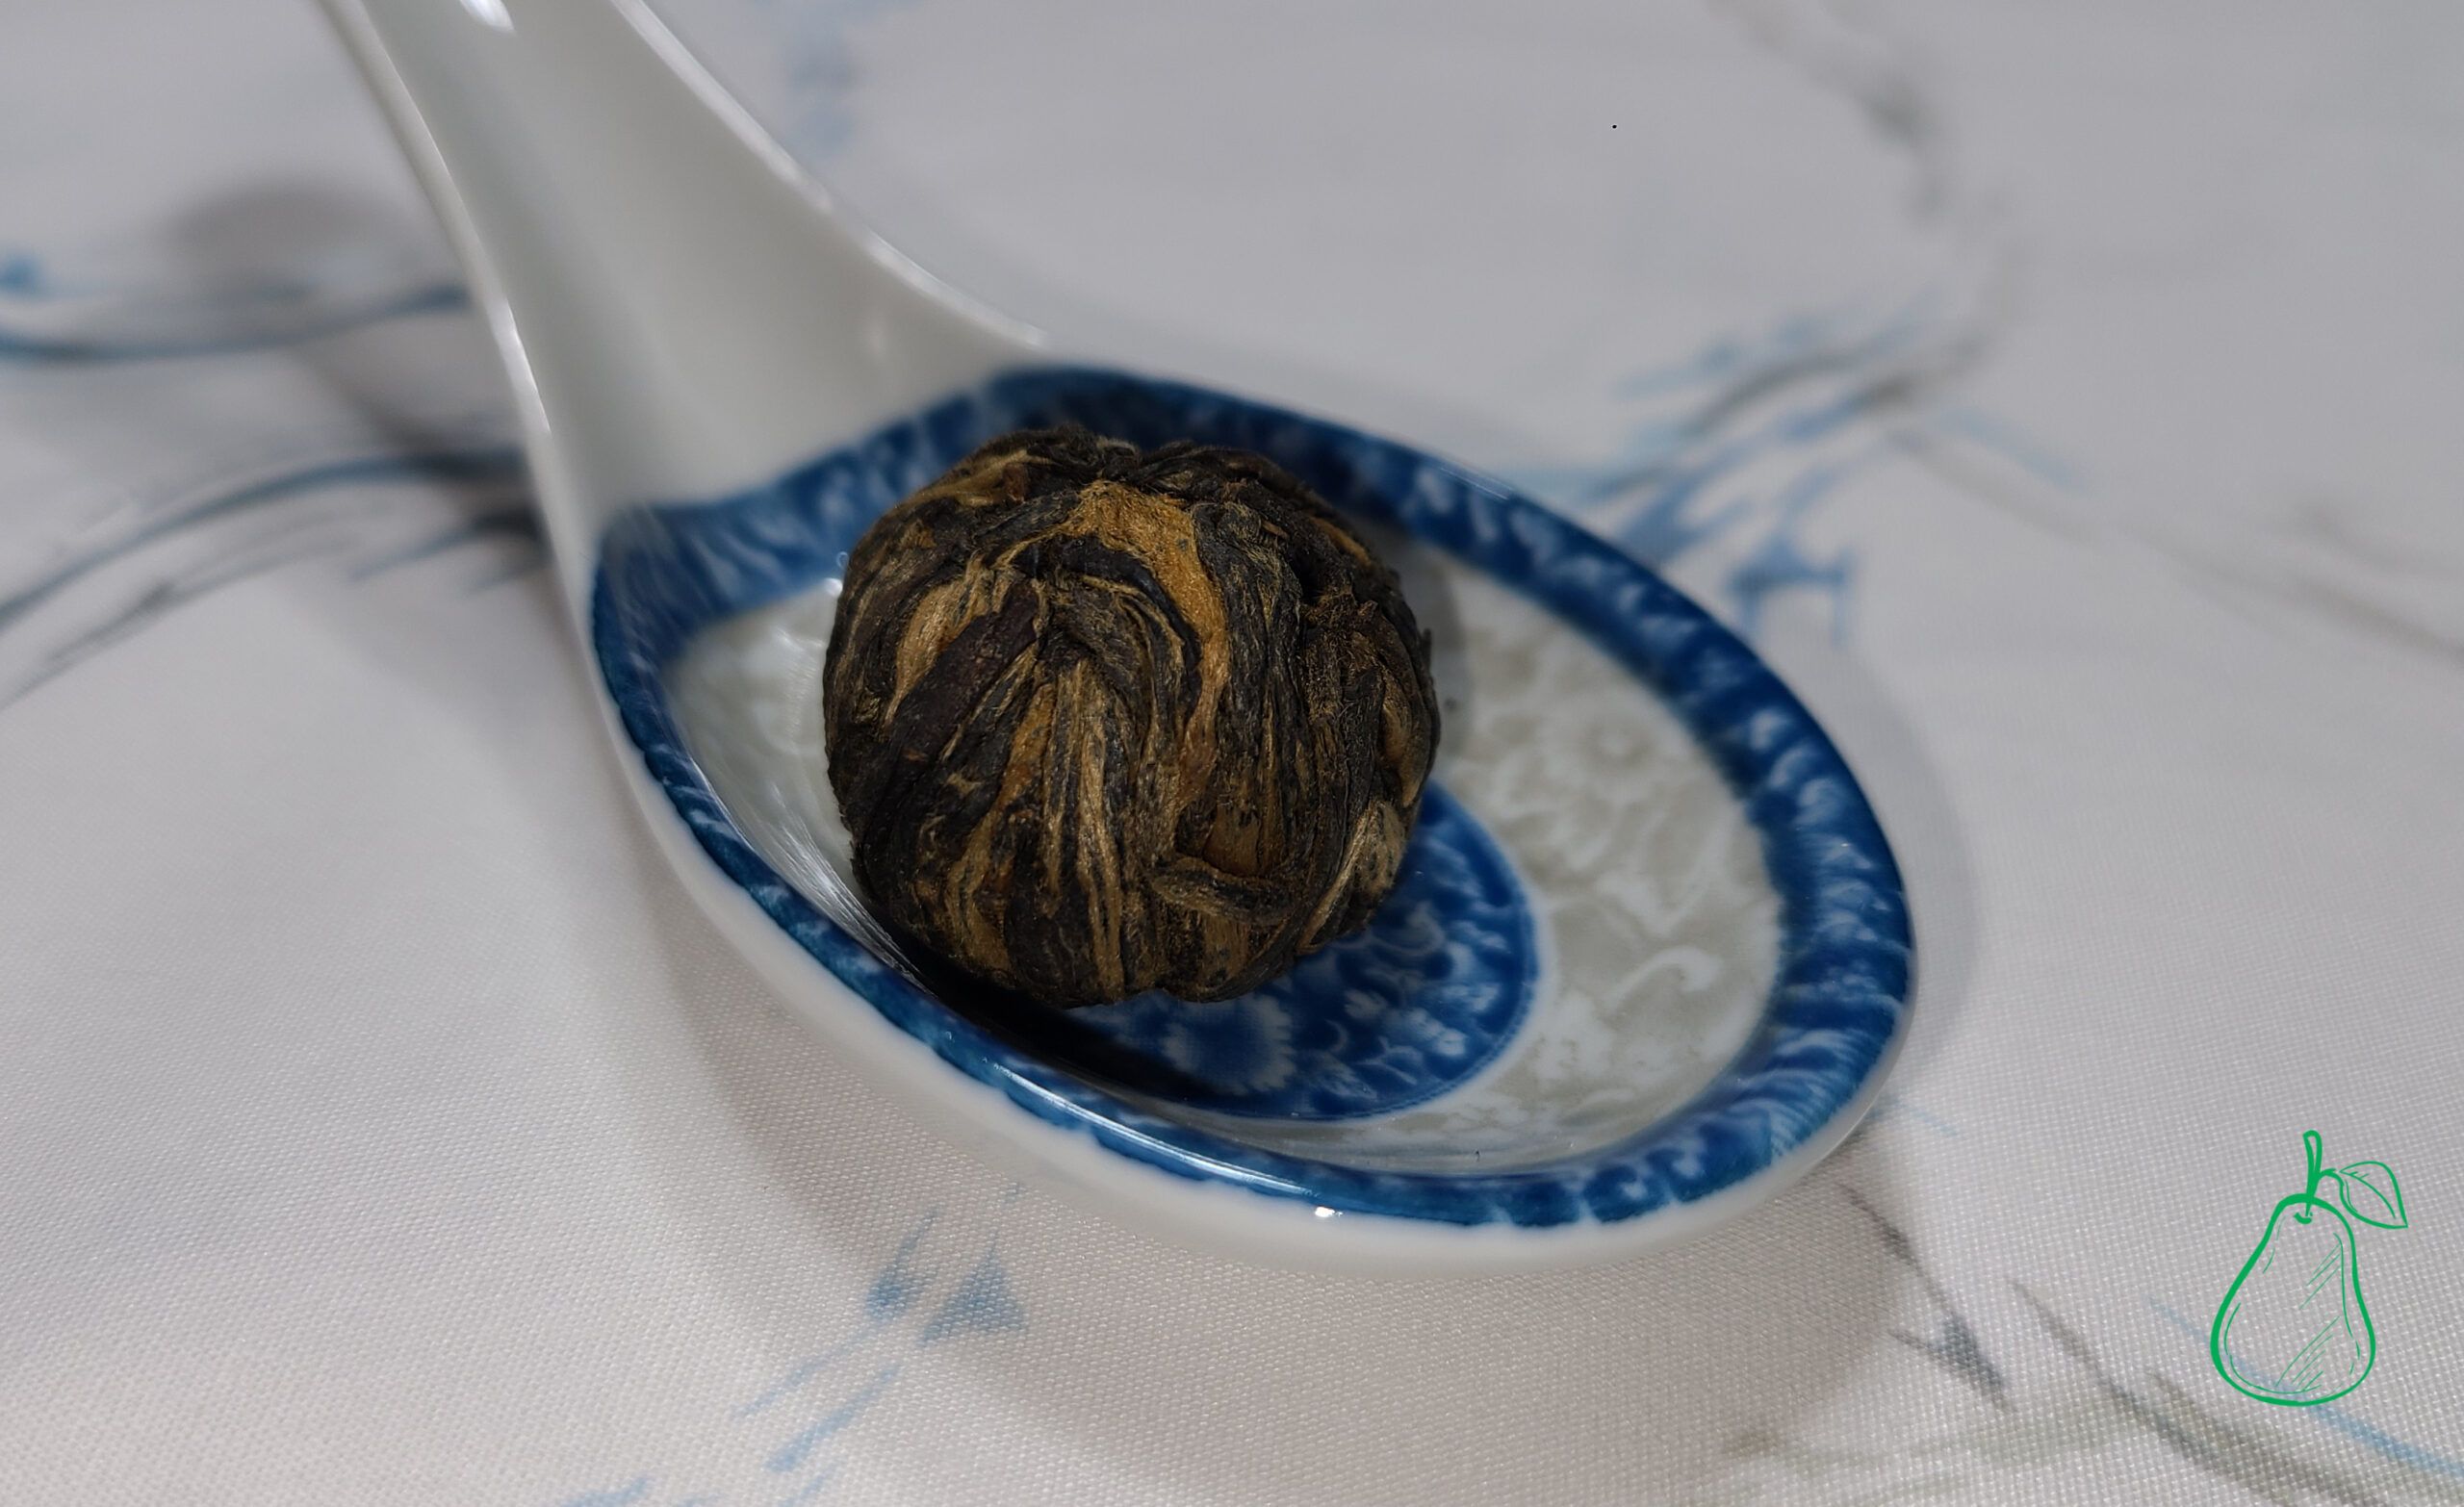 Black Pearl tea from Yunnan Sourcing